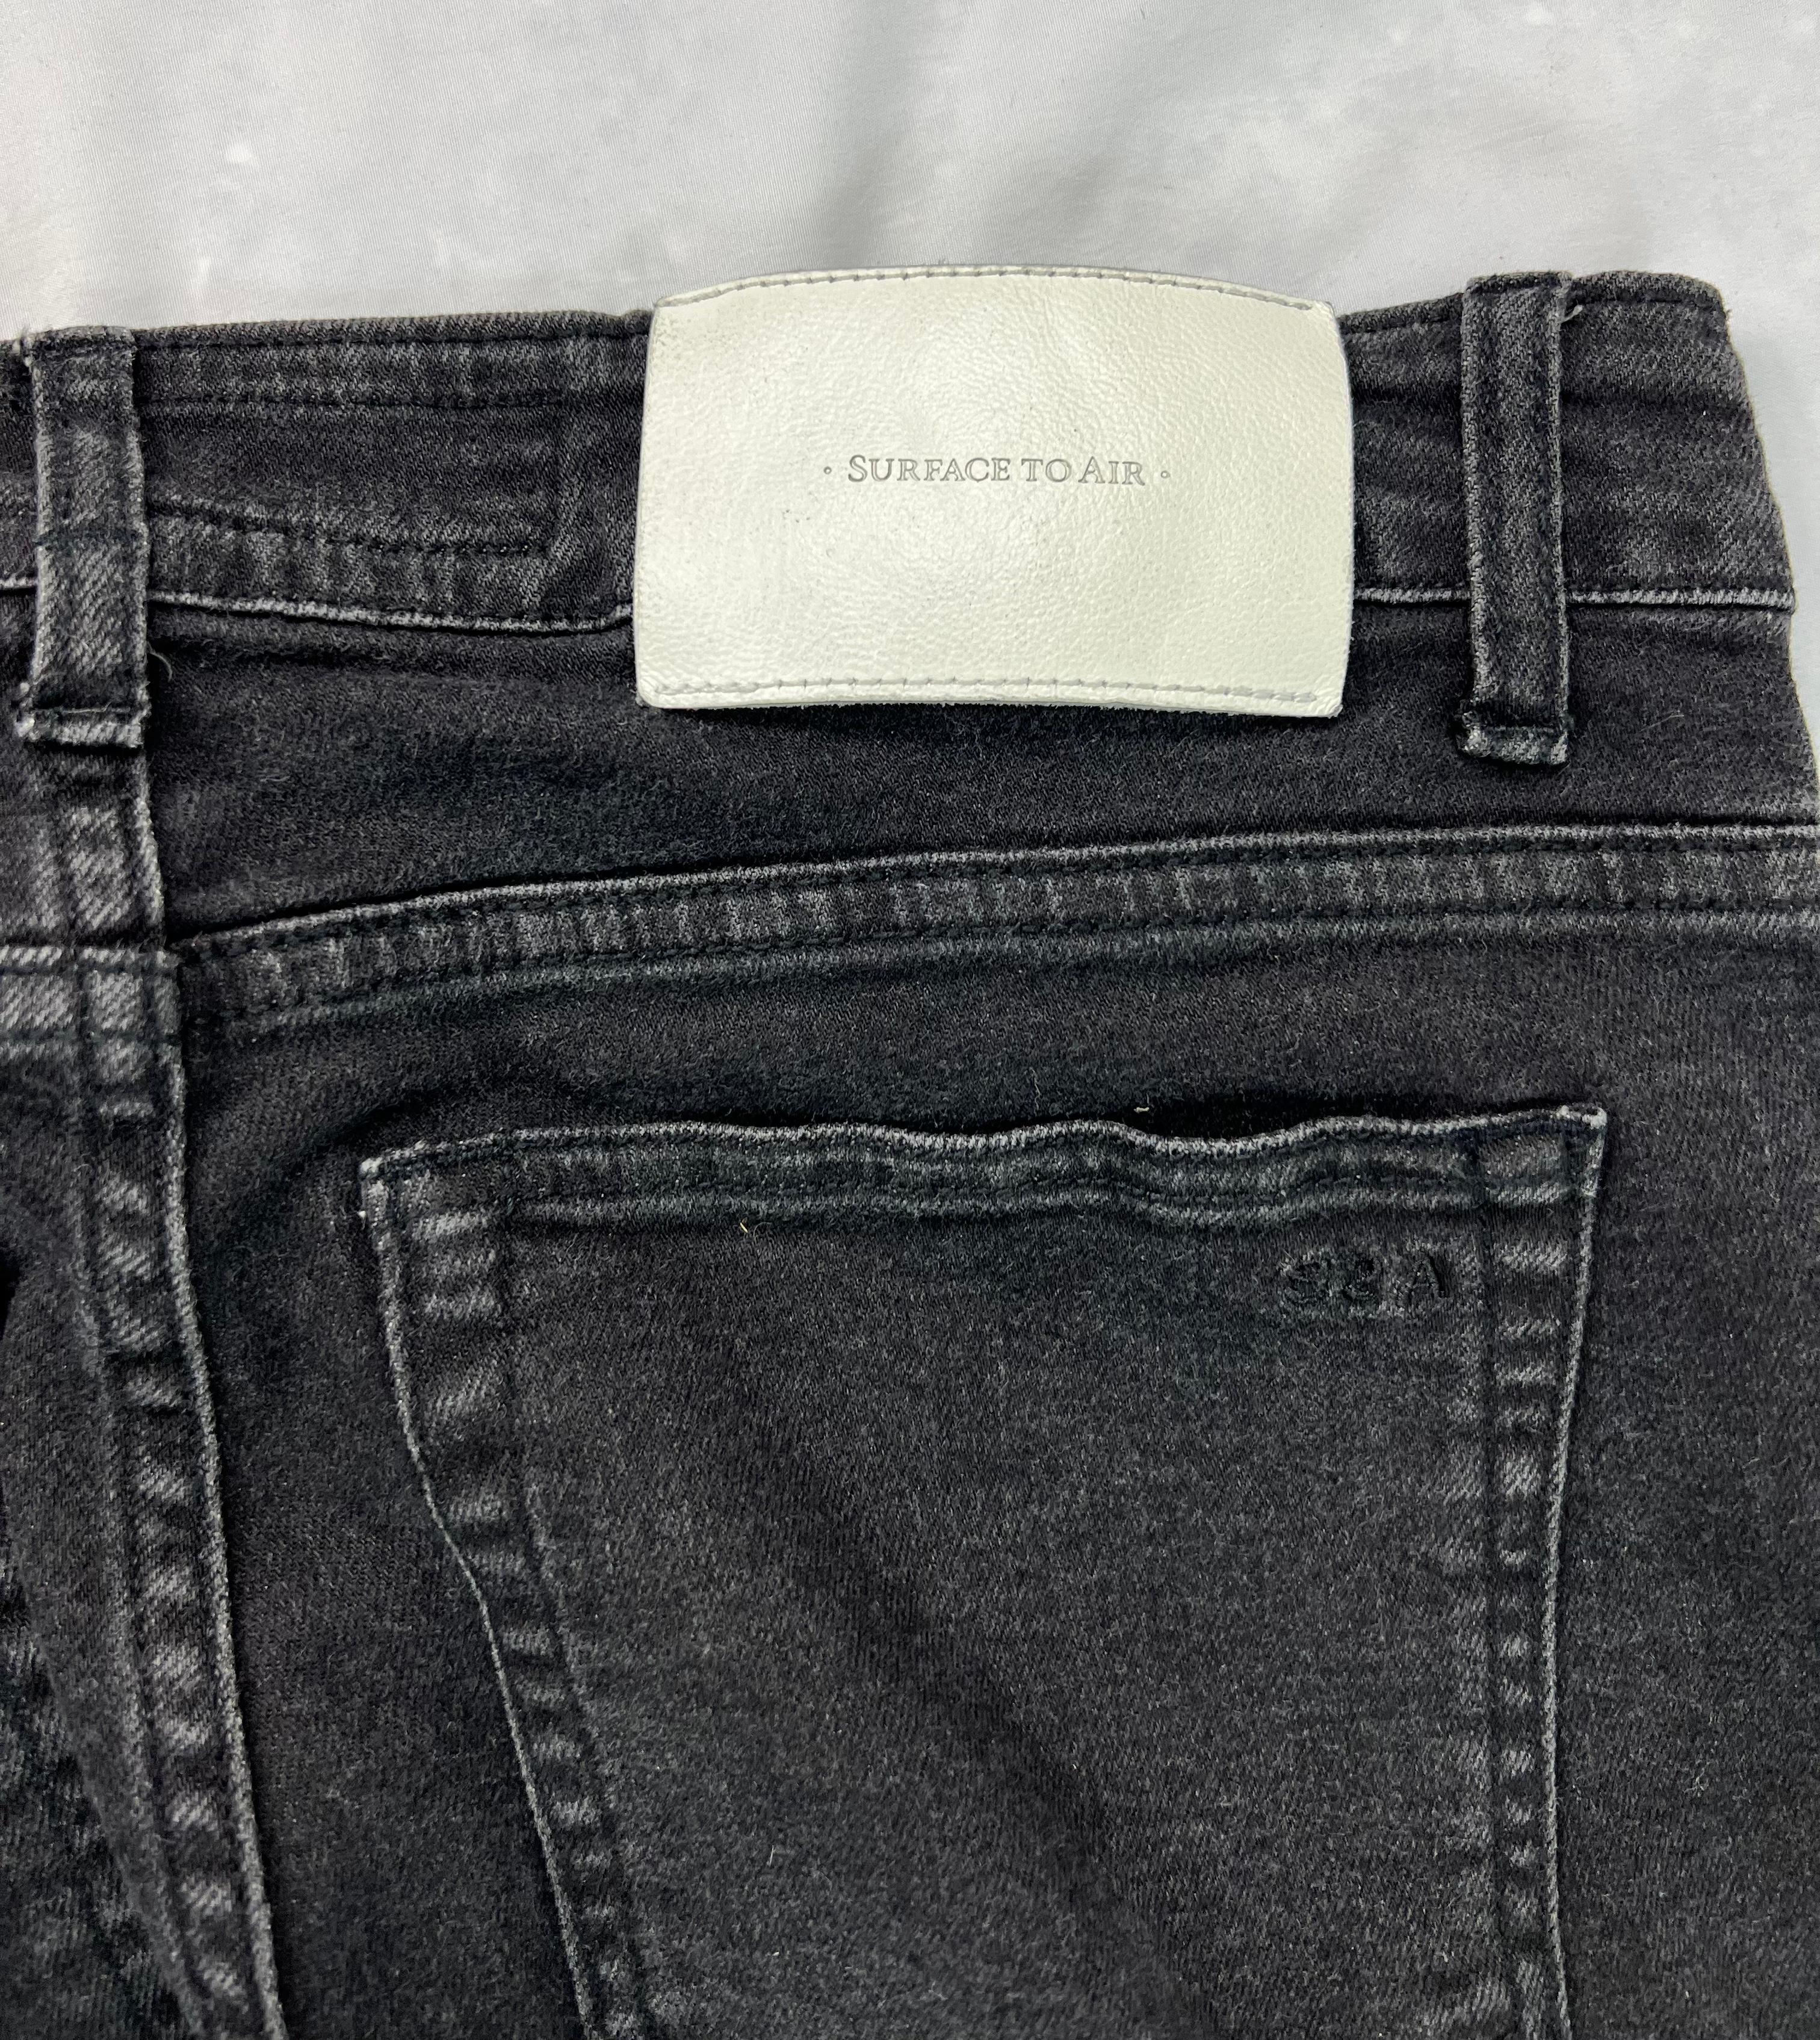 size 28 in womens jeans